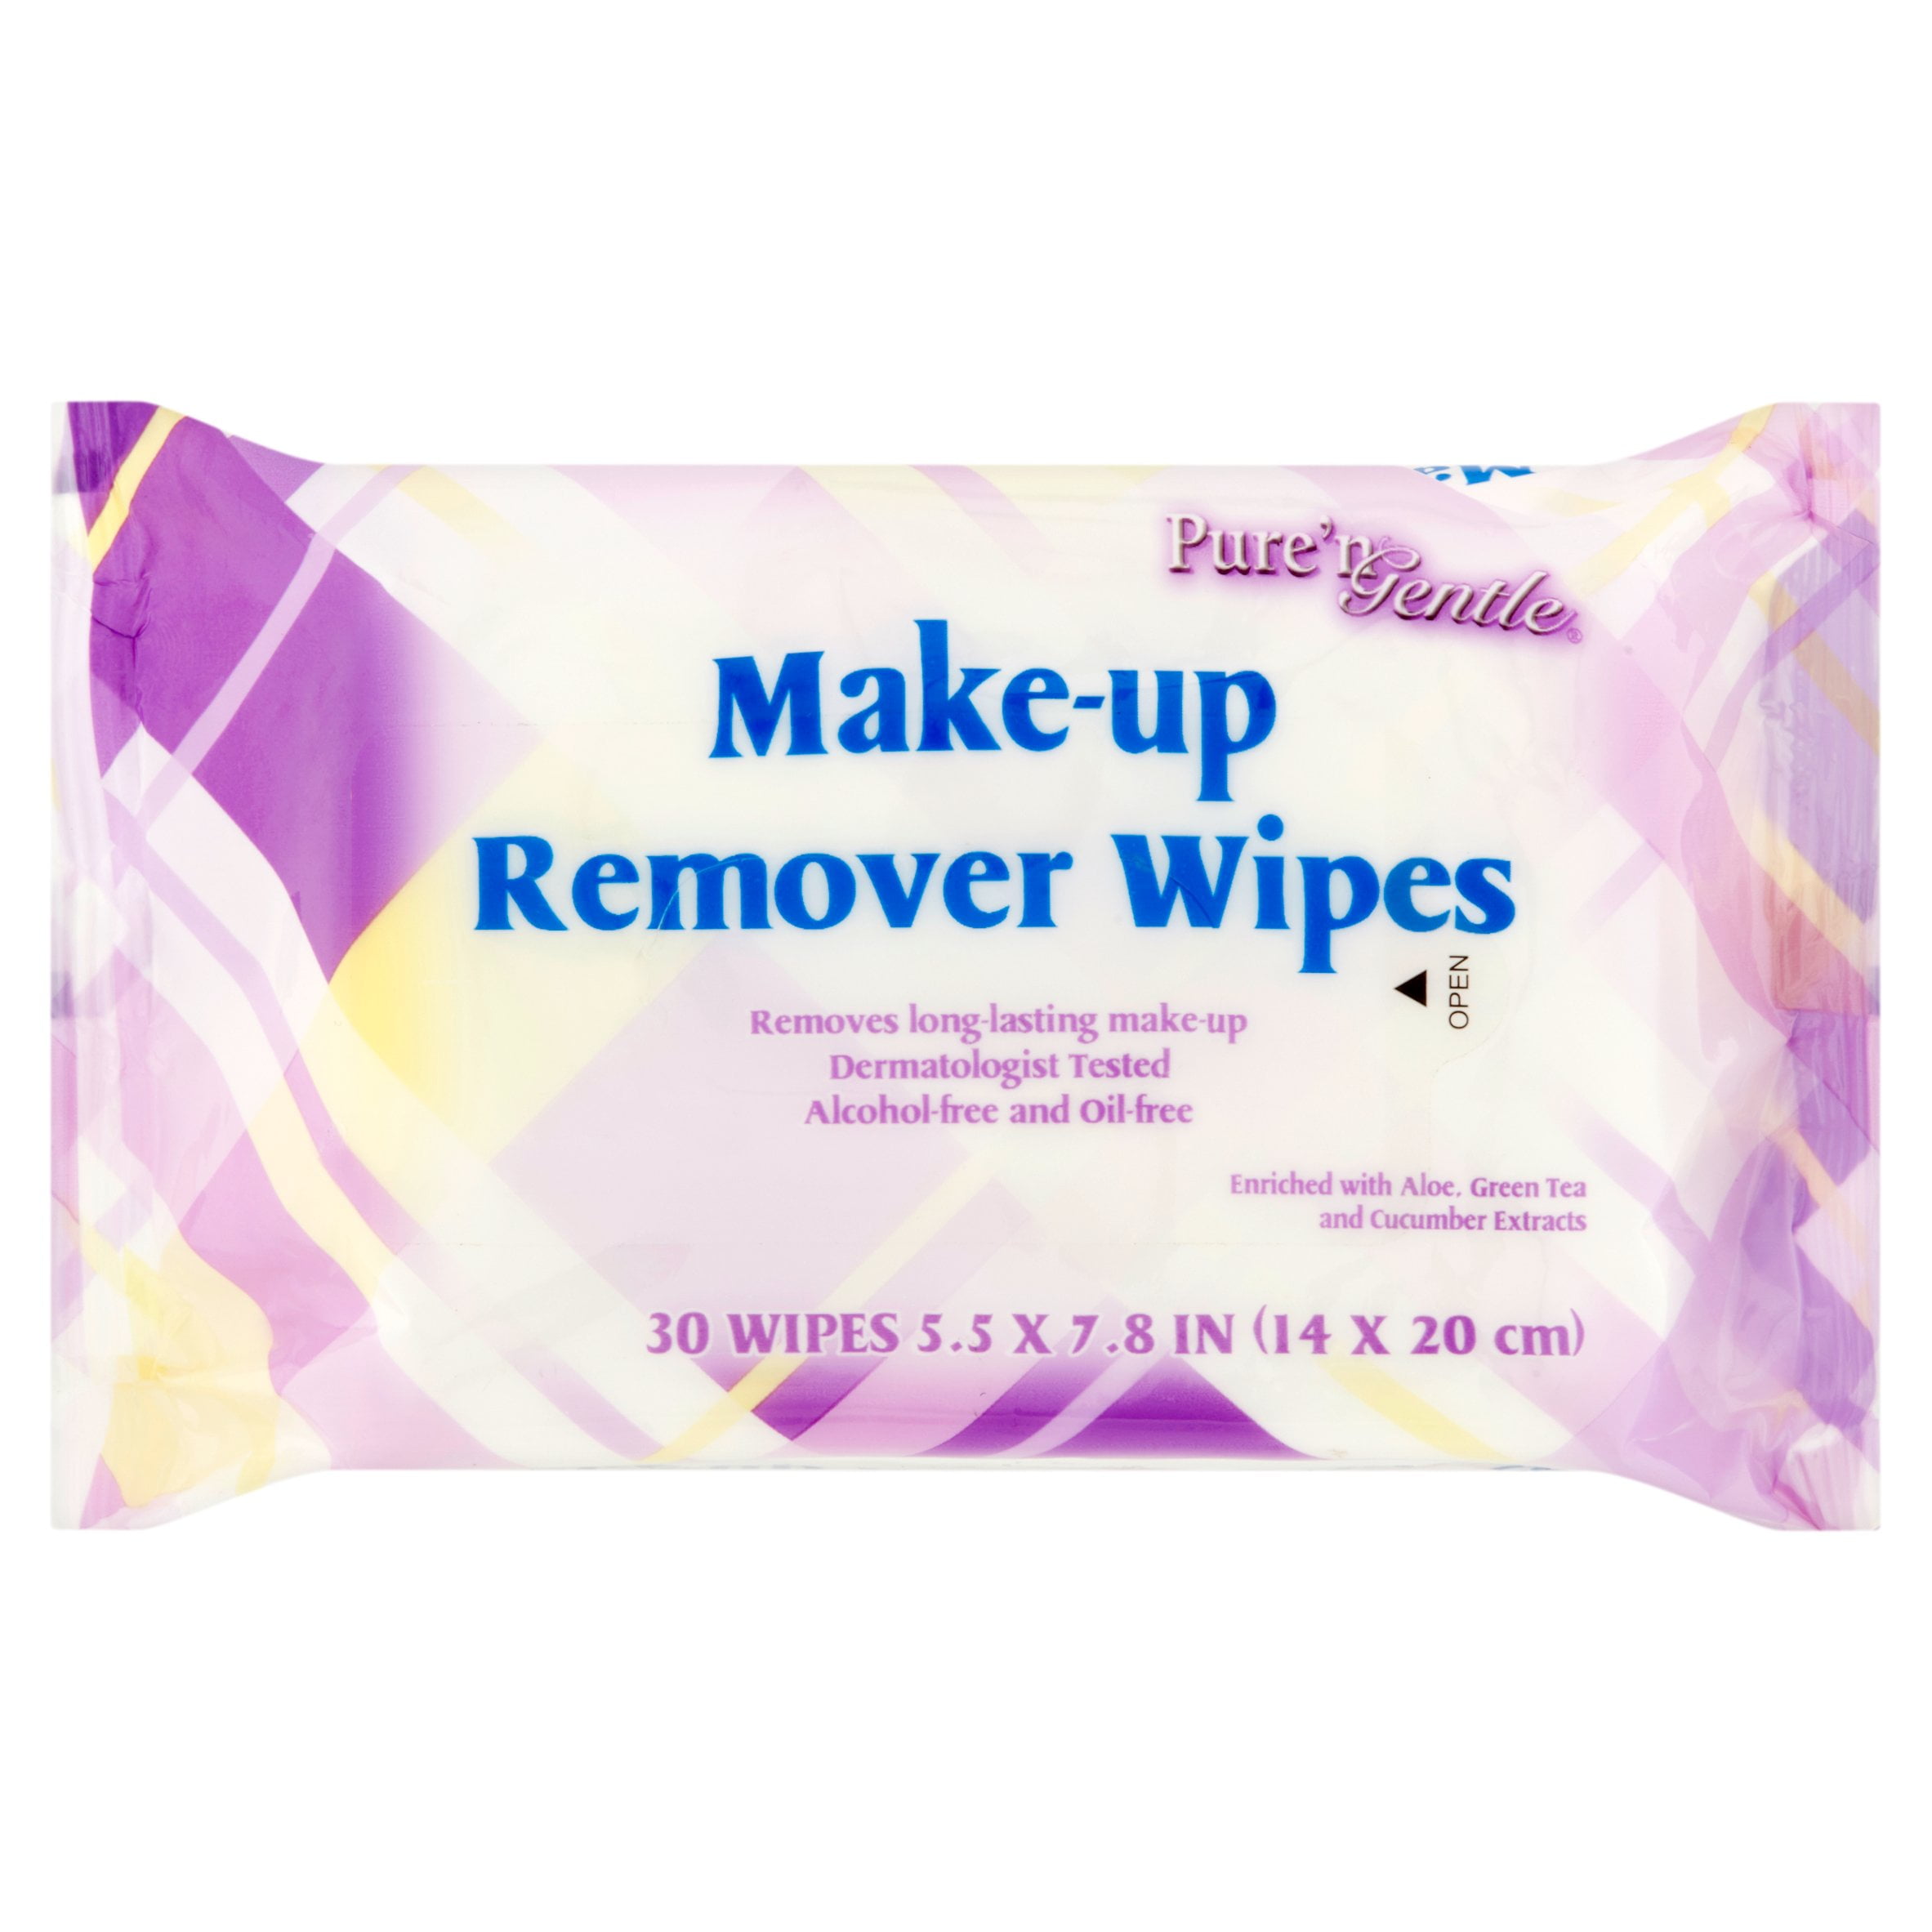 Pure'N Gentle Make-up Remover Wipes, 30 Count